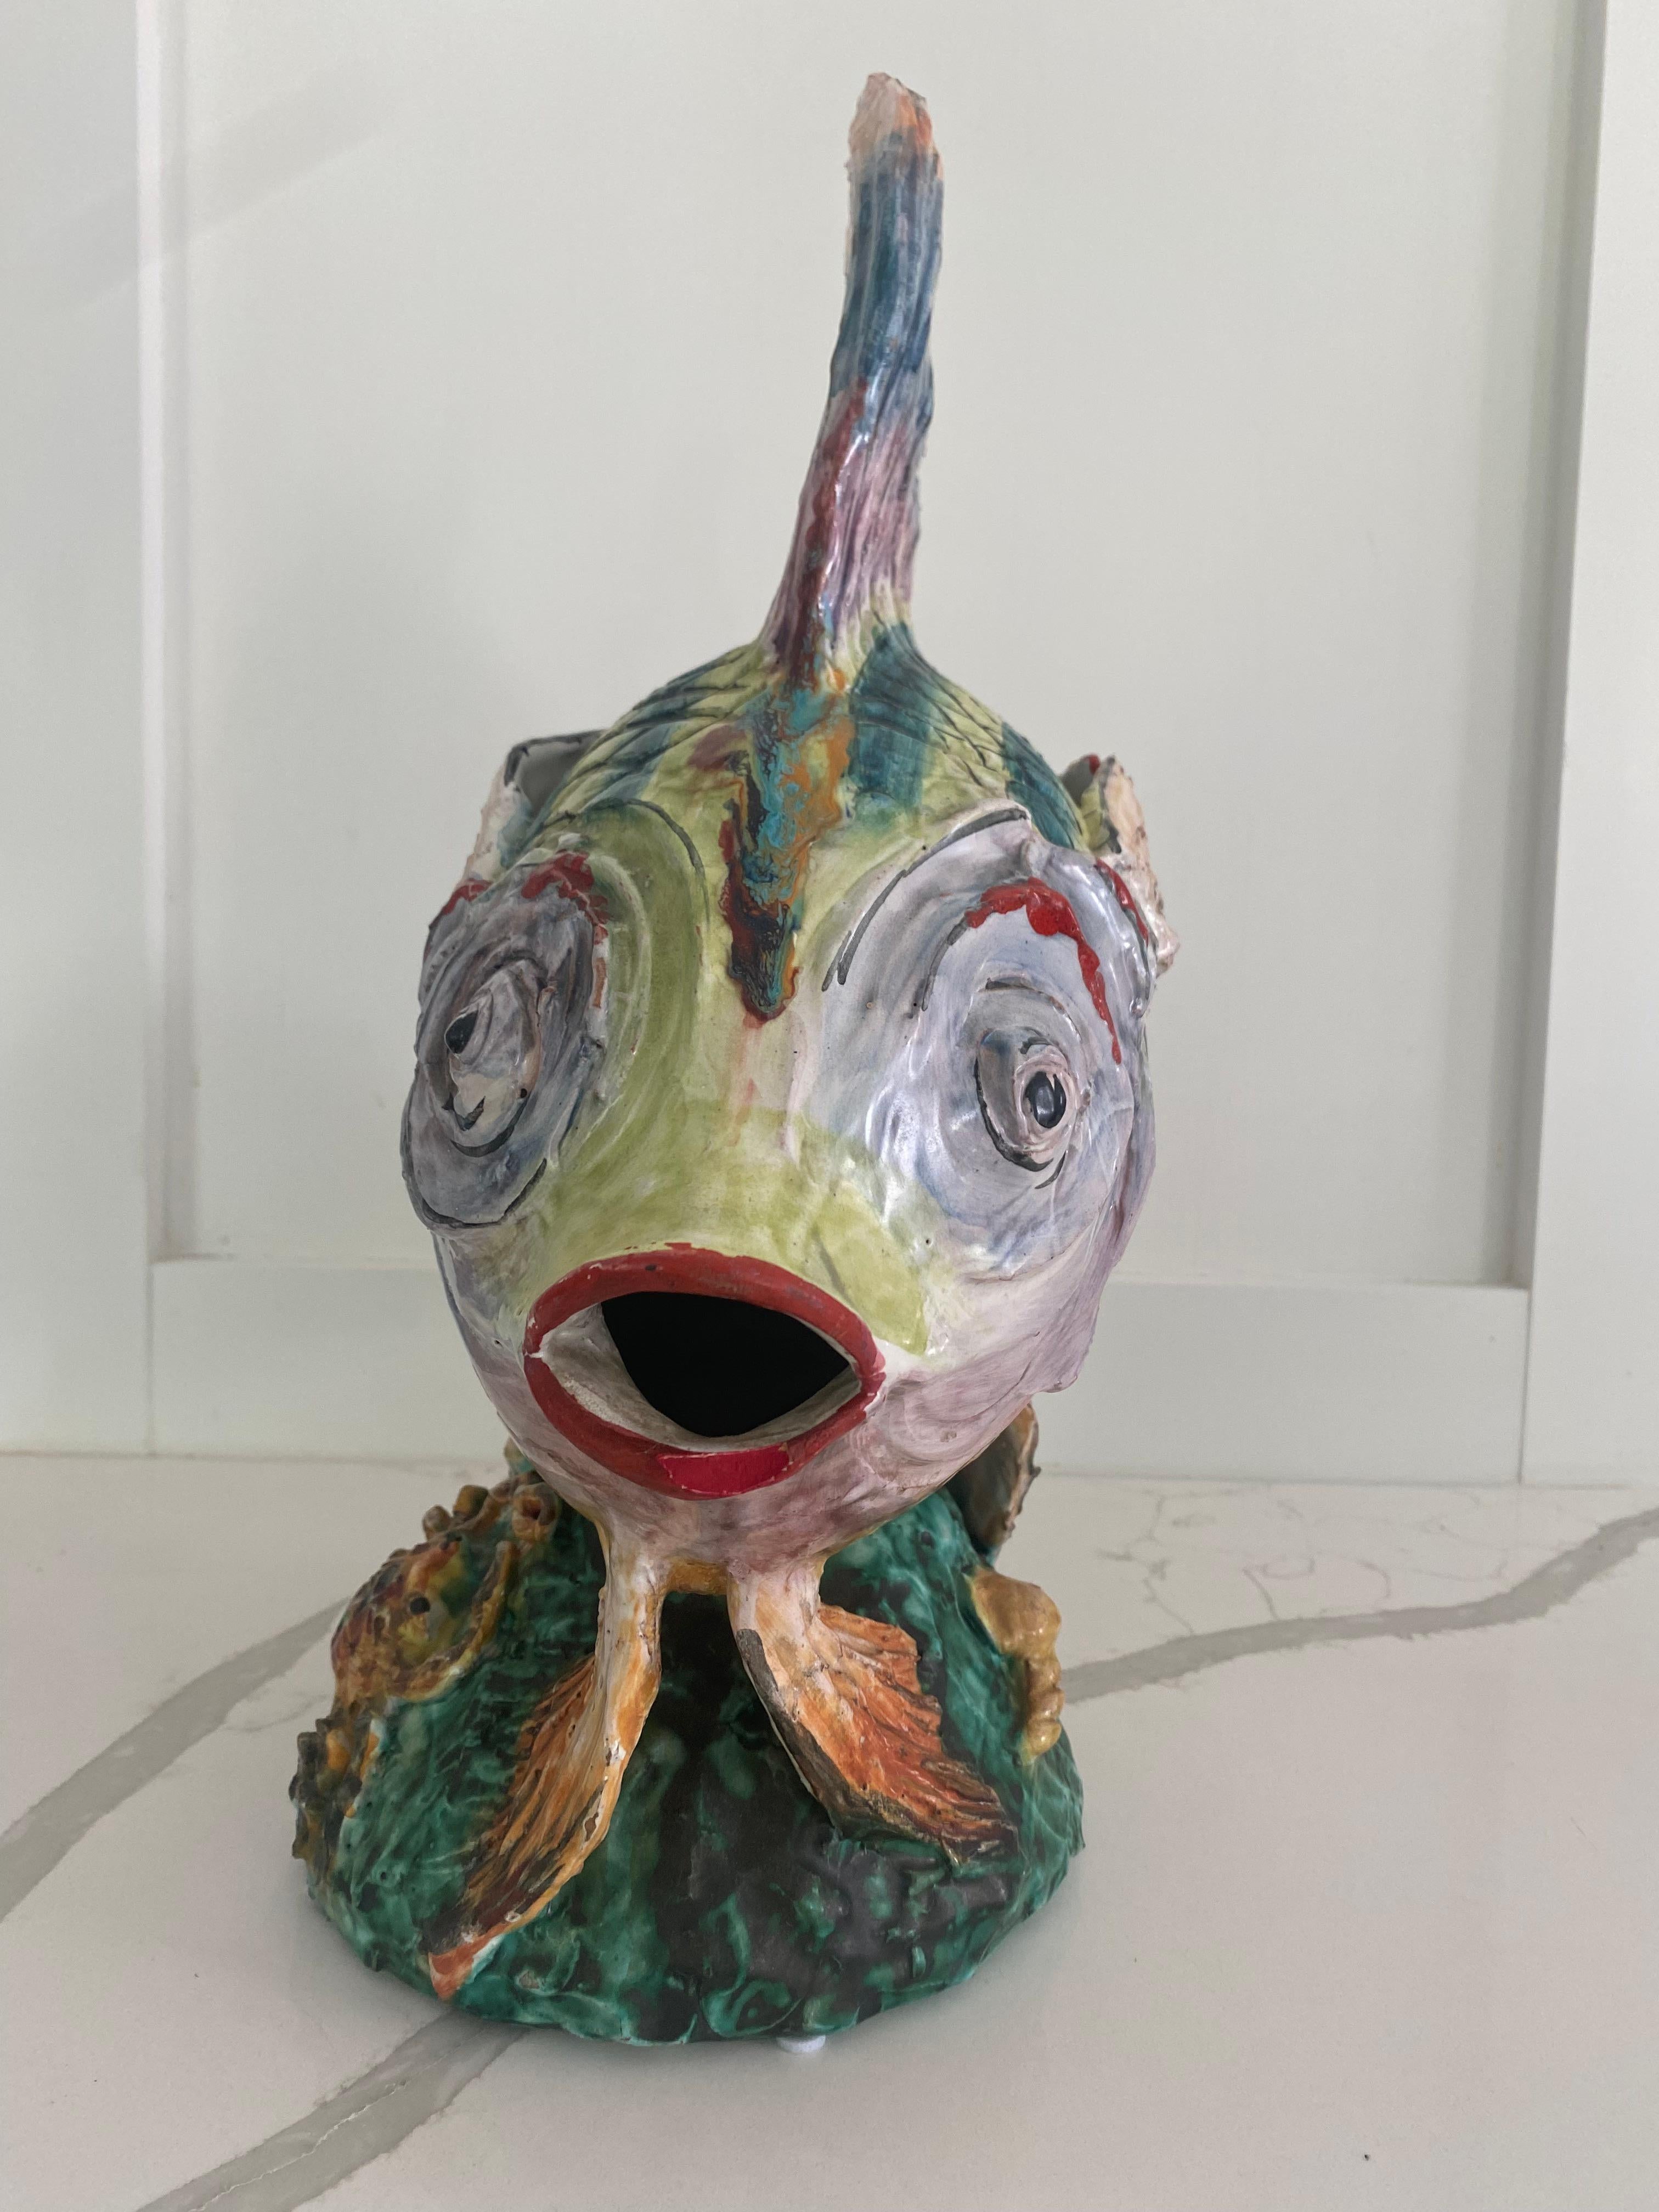 Spectacular modeled fish sculpture with majolica glaze in muilticolors similar to Eugenio Pattarino, Italy.  Detailed base with sea life.

Approx 7 x 17 x 17.5 inches tall